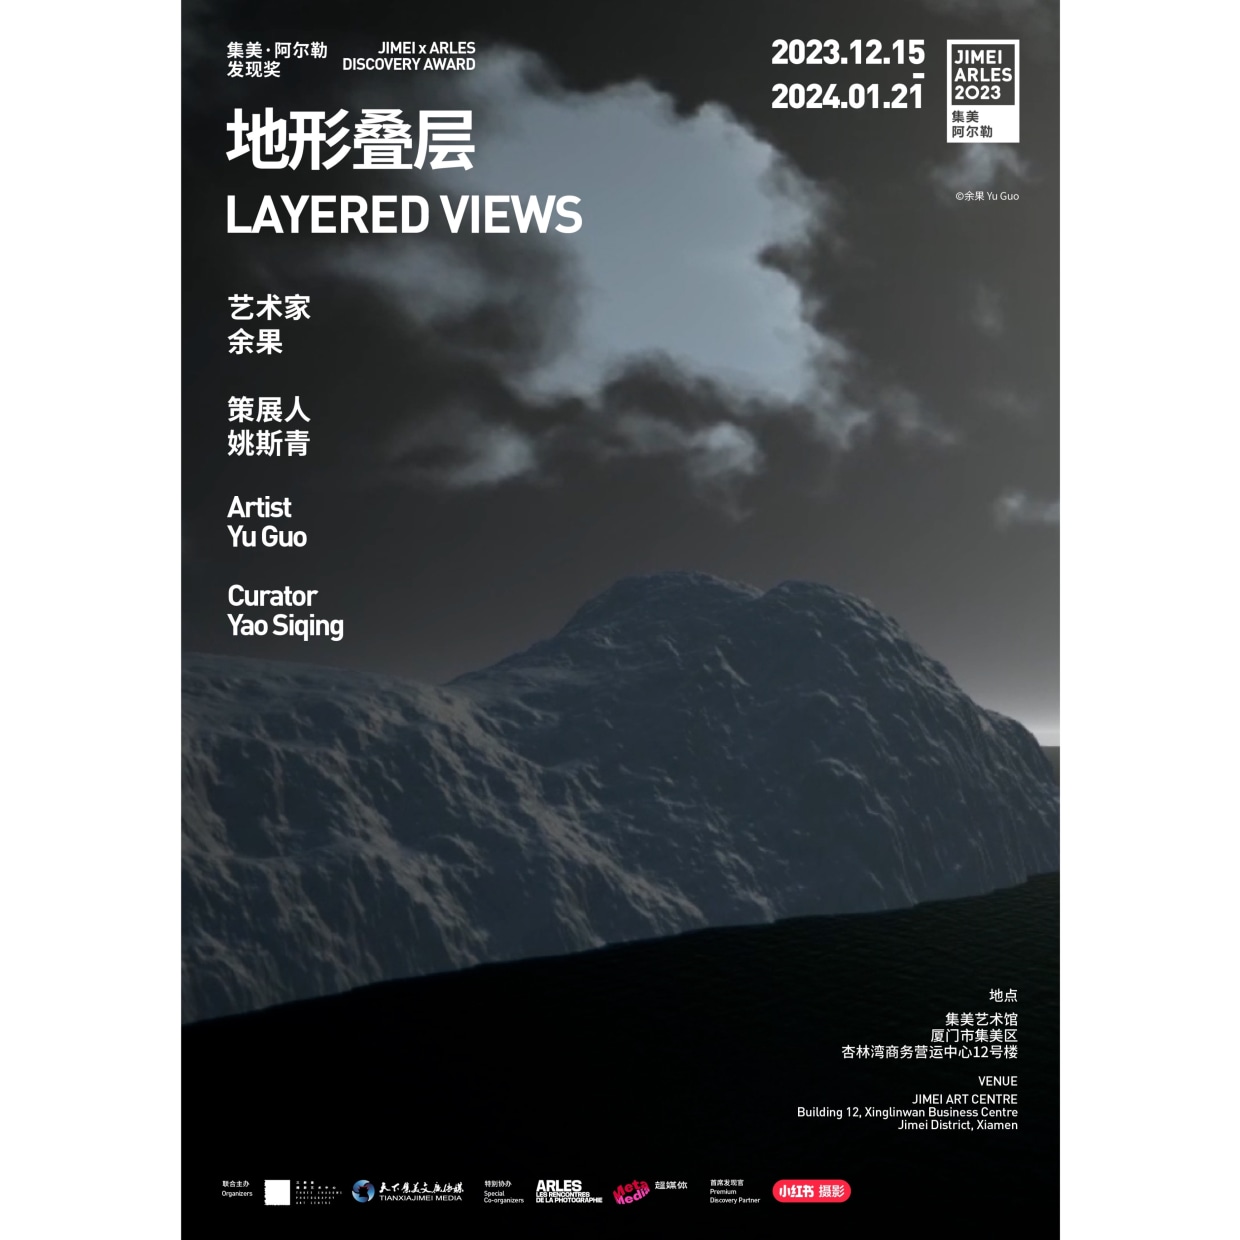 Yu Guo LAYERED VIEWS The exhibition, titled “Layered Views”, attempts to use an imprecise method to summarize both the themes...